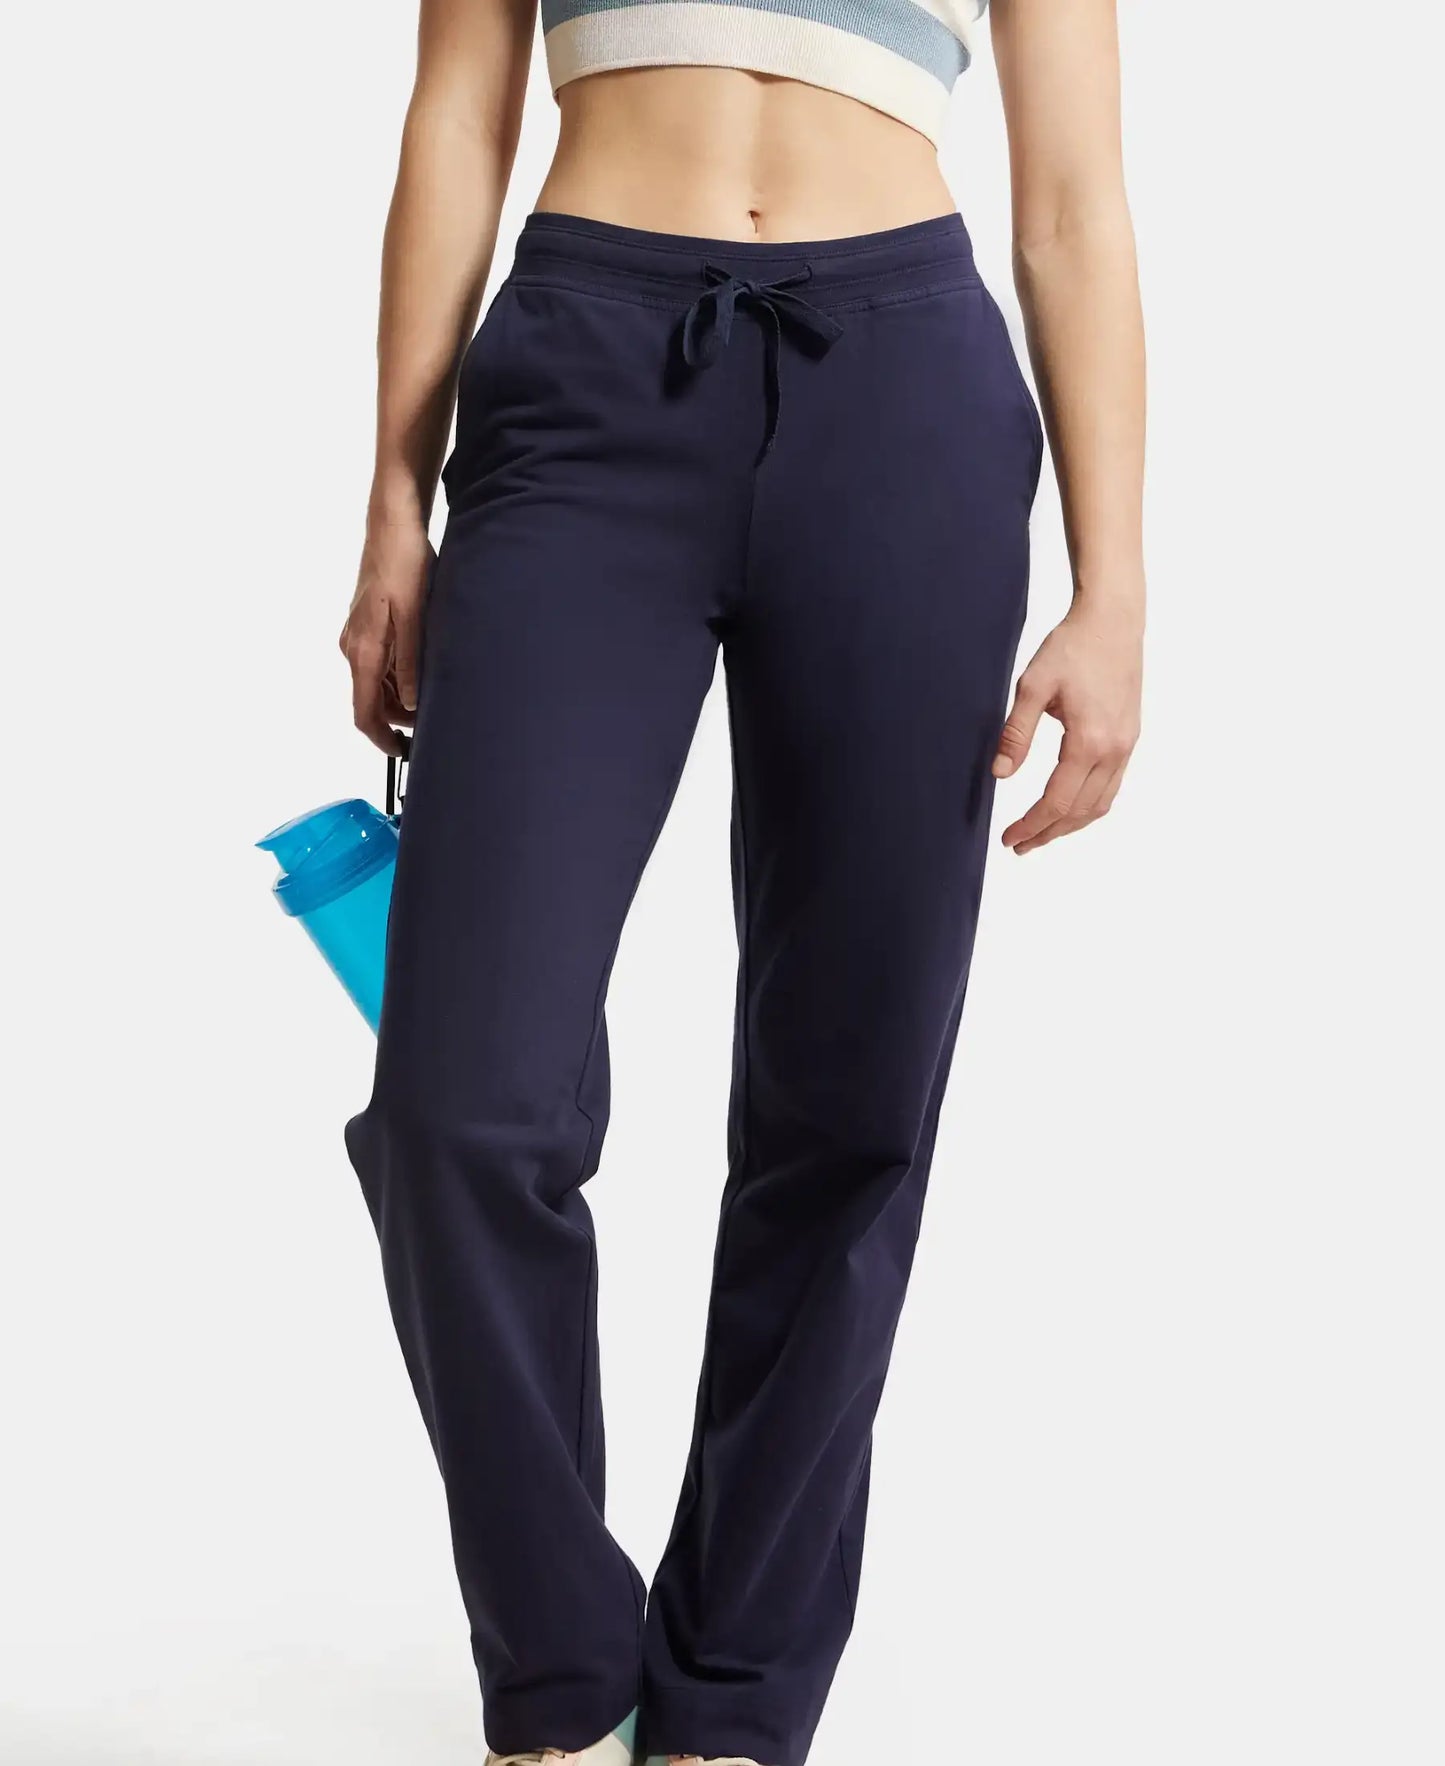 Super Combed Cotton Elastane Stretch Relaxed Fit Trackpants With Side Pockets - Navy Blazer